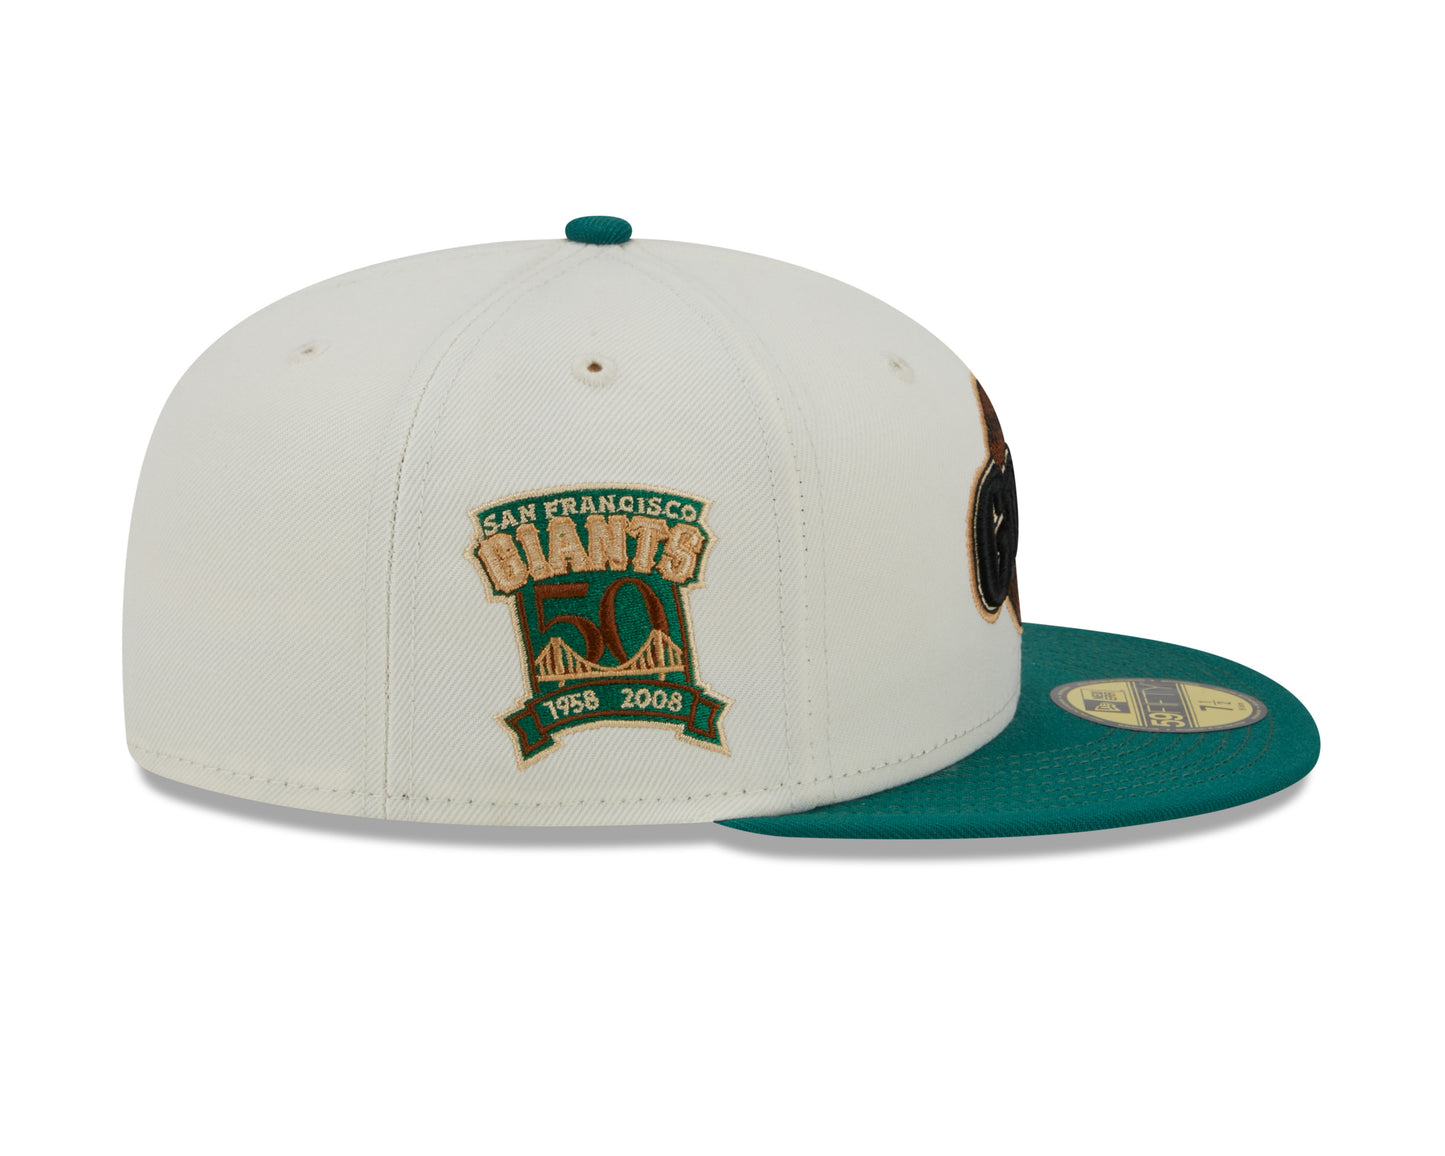 New Era - 59Fifty Fitted Cap - CAMP - San Francisco Giants 50 Years Anniversary - White/Green - Headz Up 